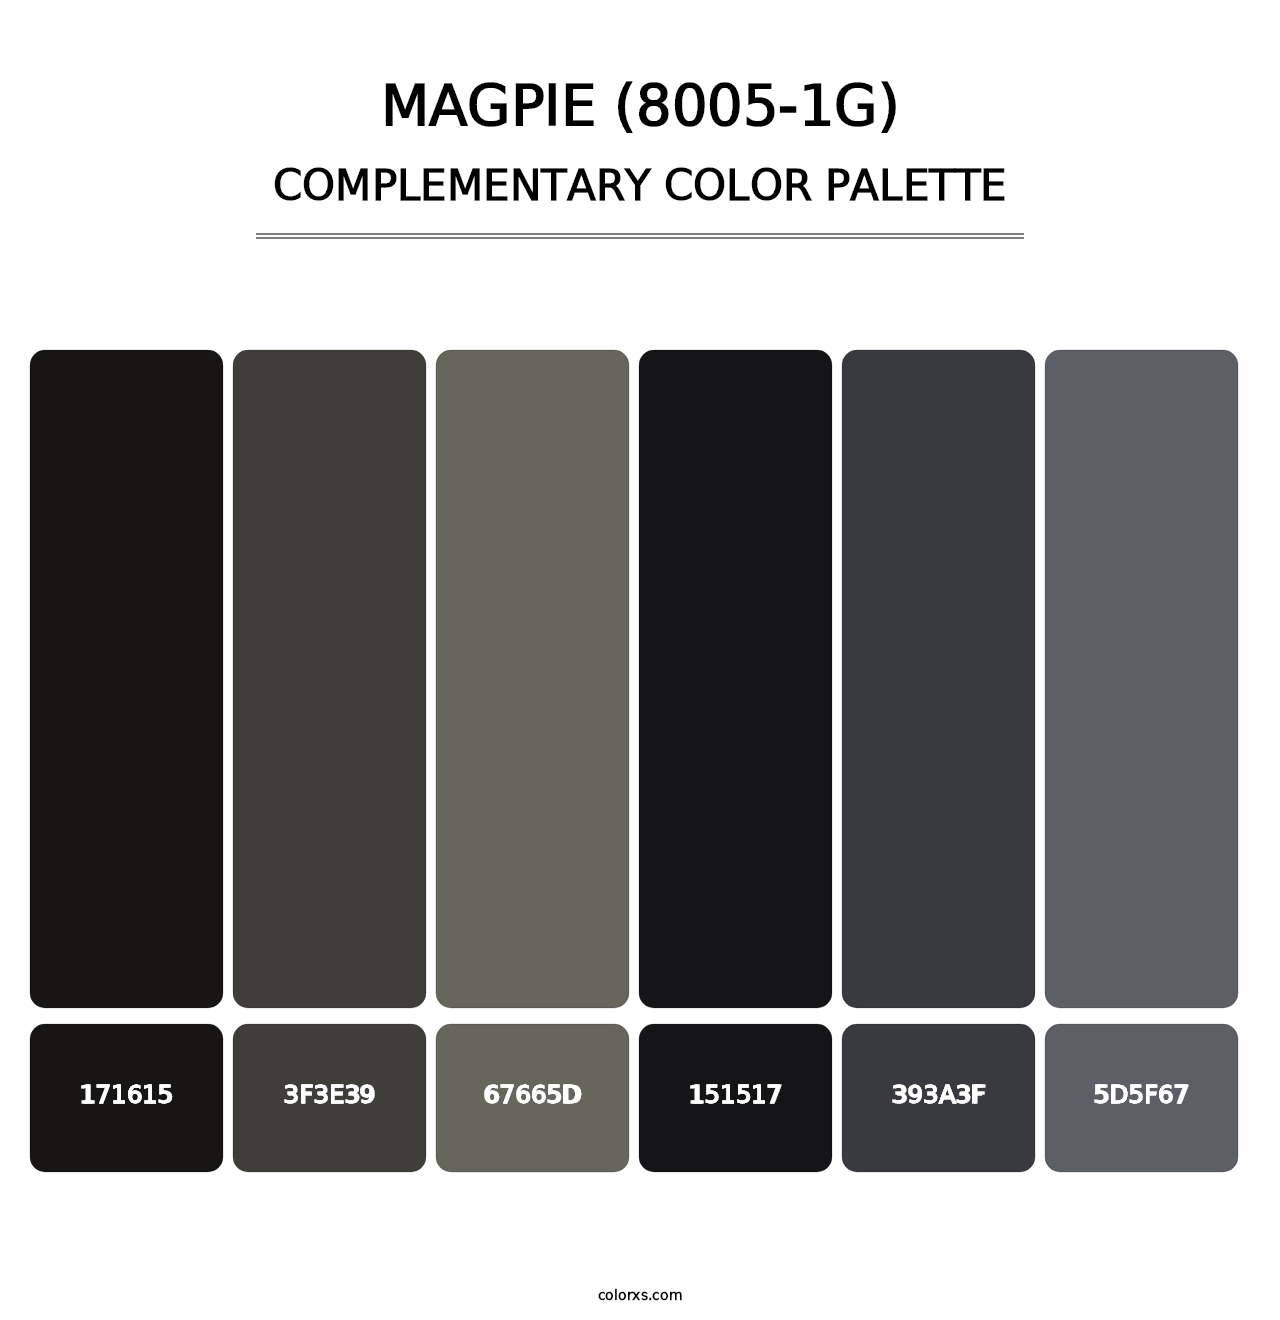 Magpie (8005-1G) - Complementary Color Palette